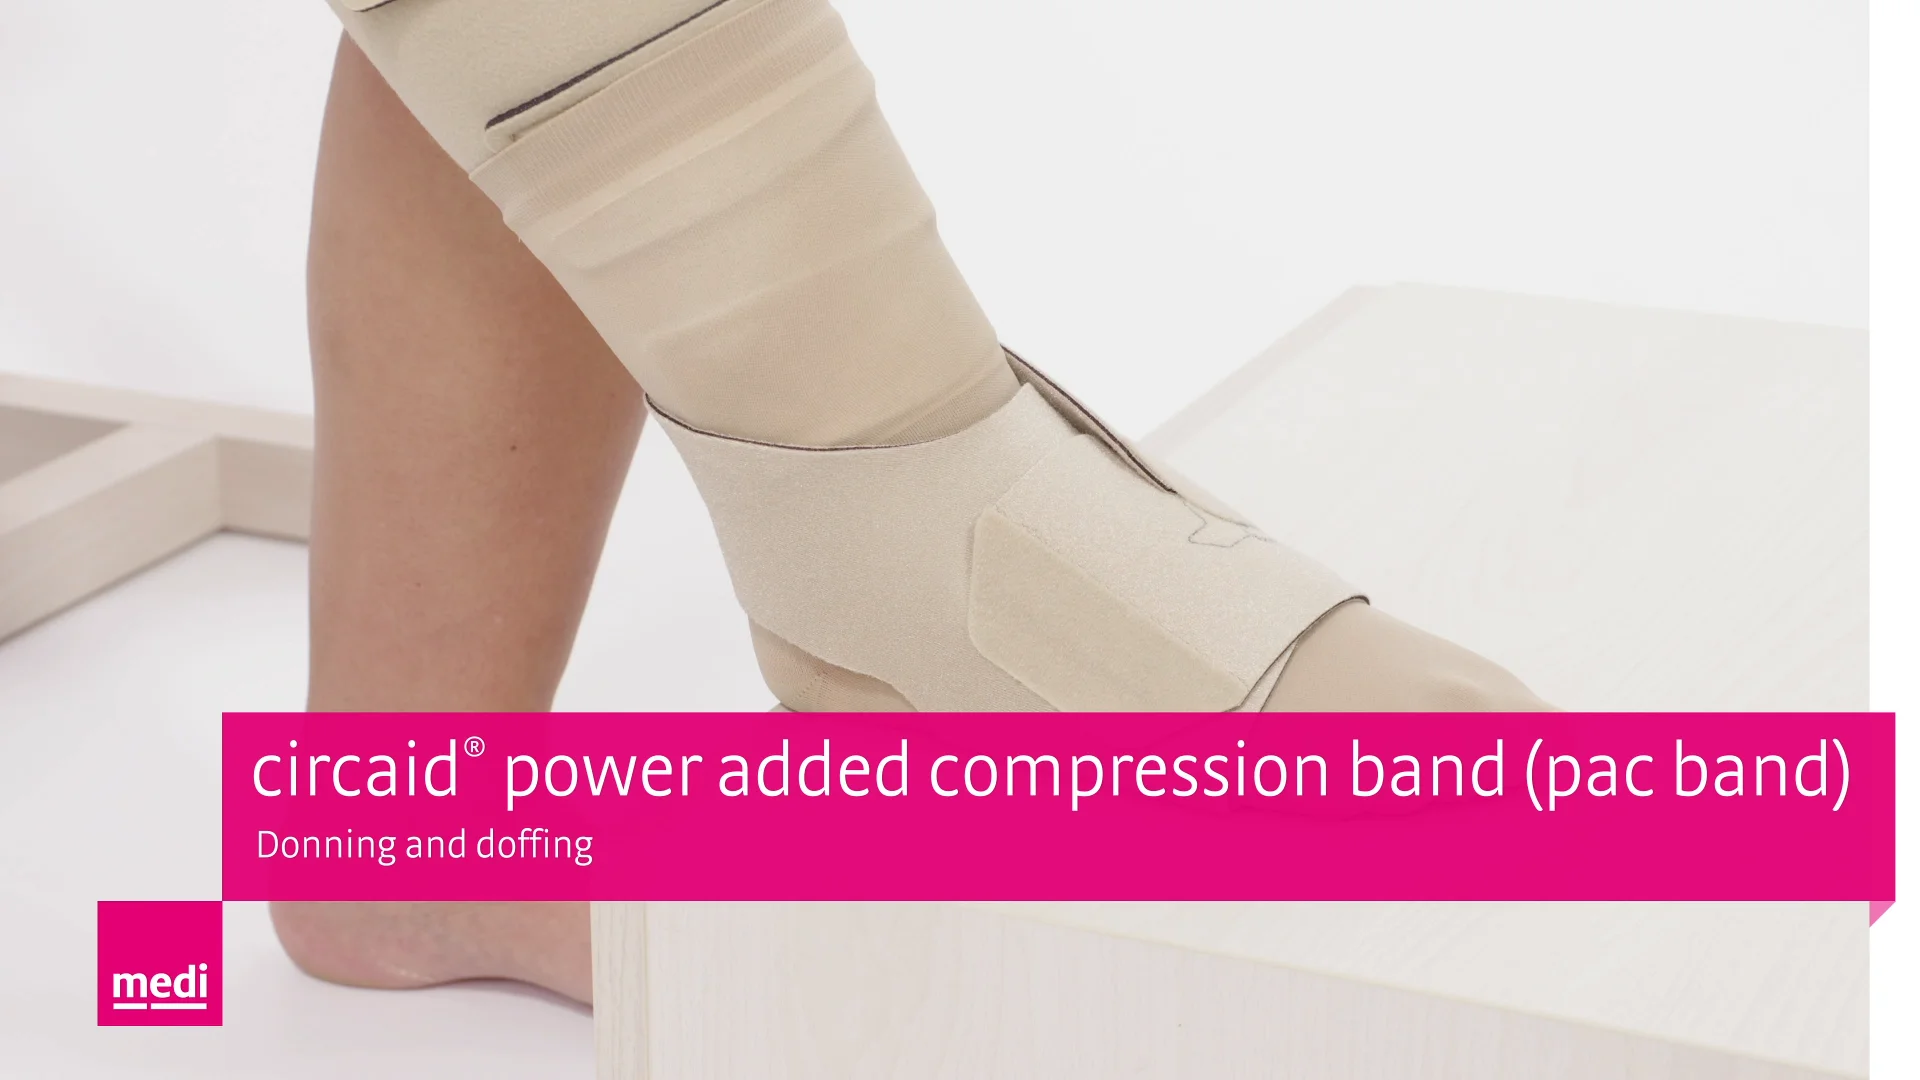 circaid® power added compression band (pac band) - Donning and